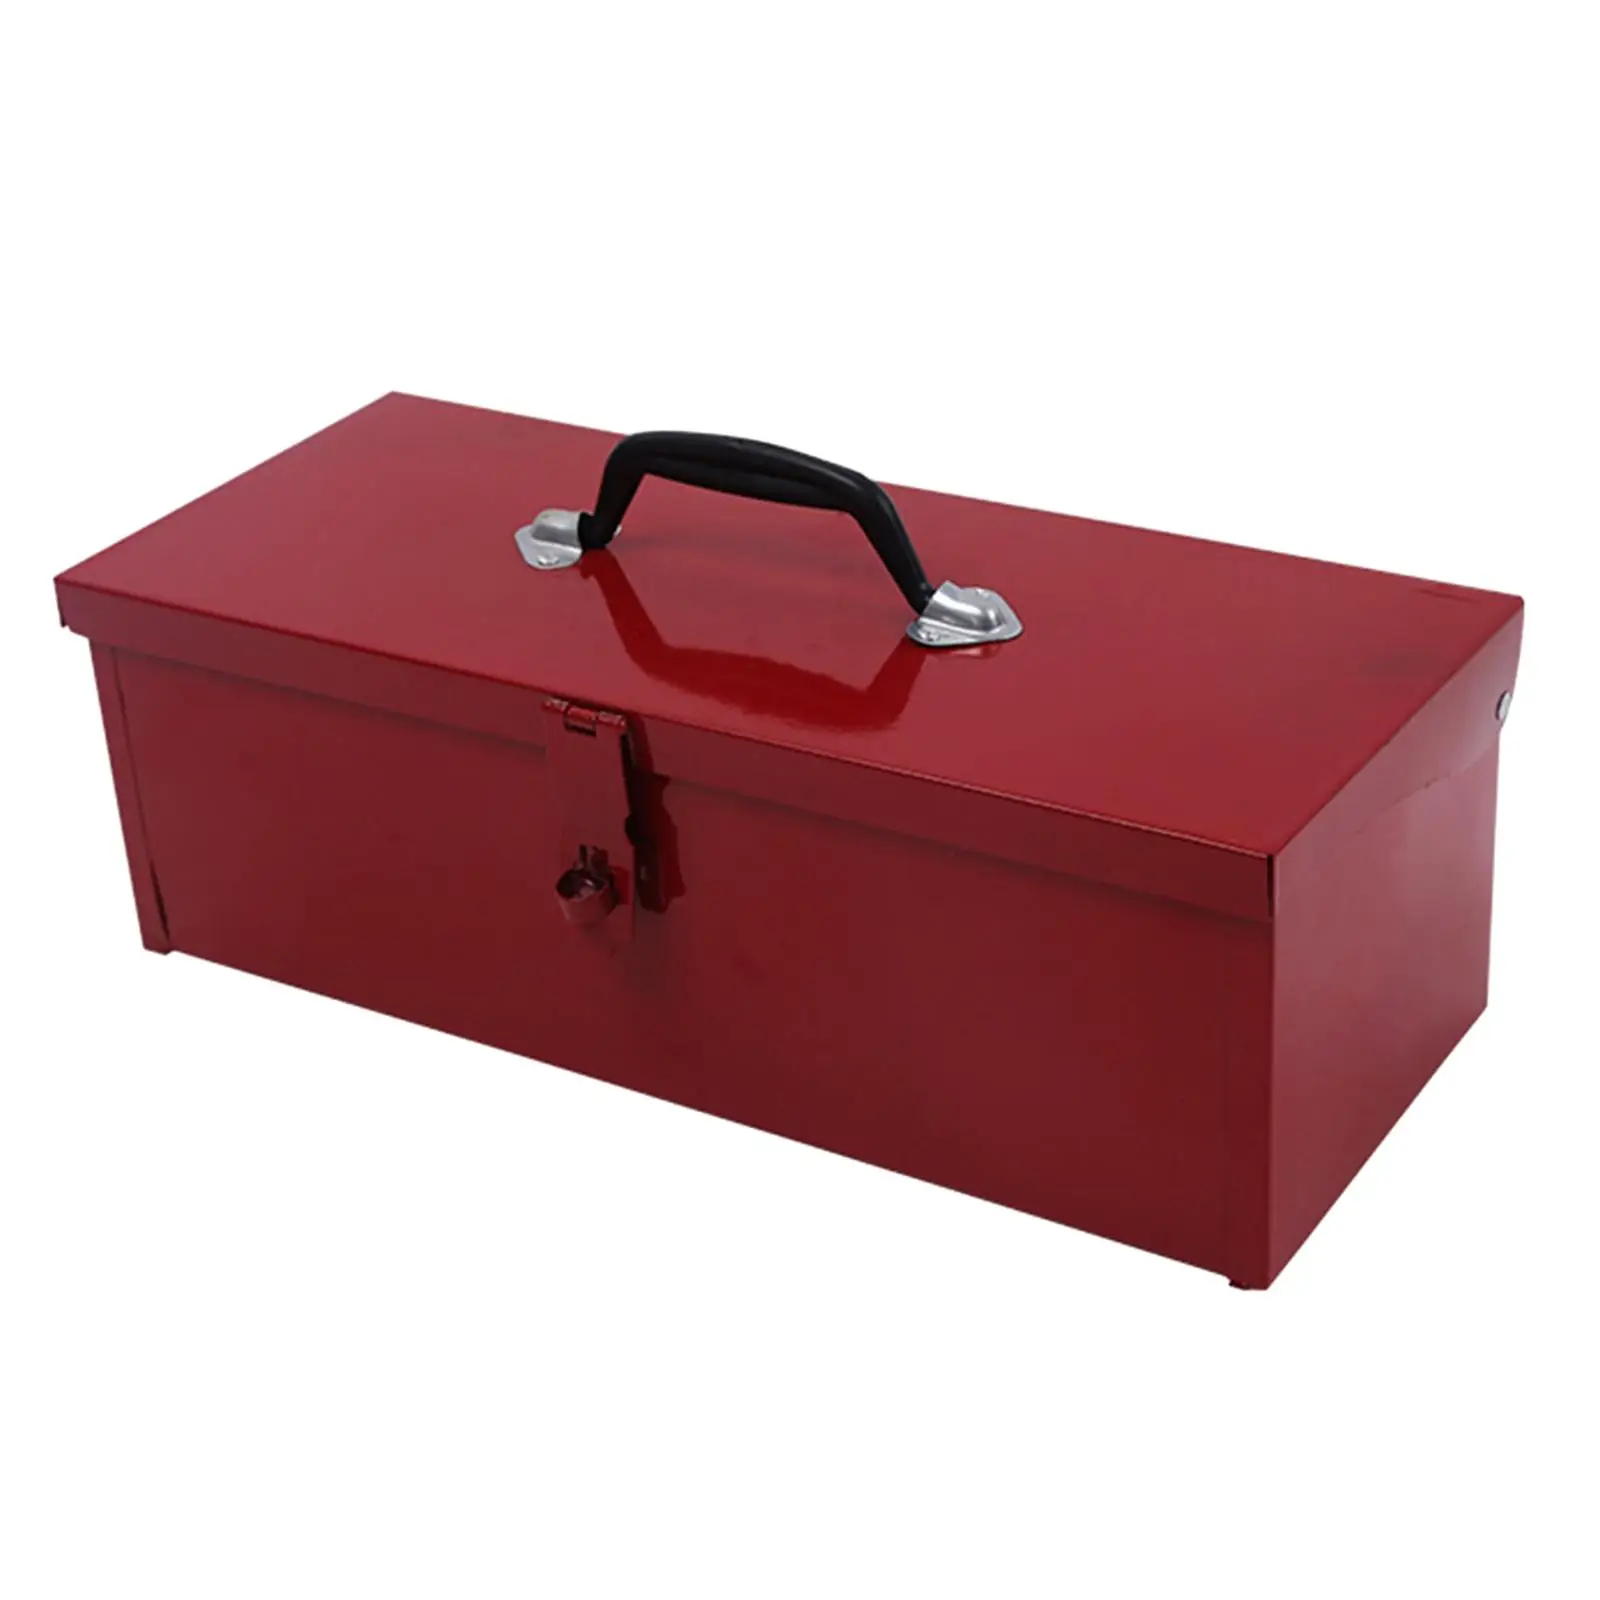 iron boxes tool Box multi function Portable Handle Storage Case Organizer tools box Heavy Duty Storage Box for Home Workshop